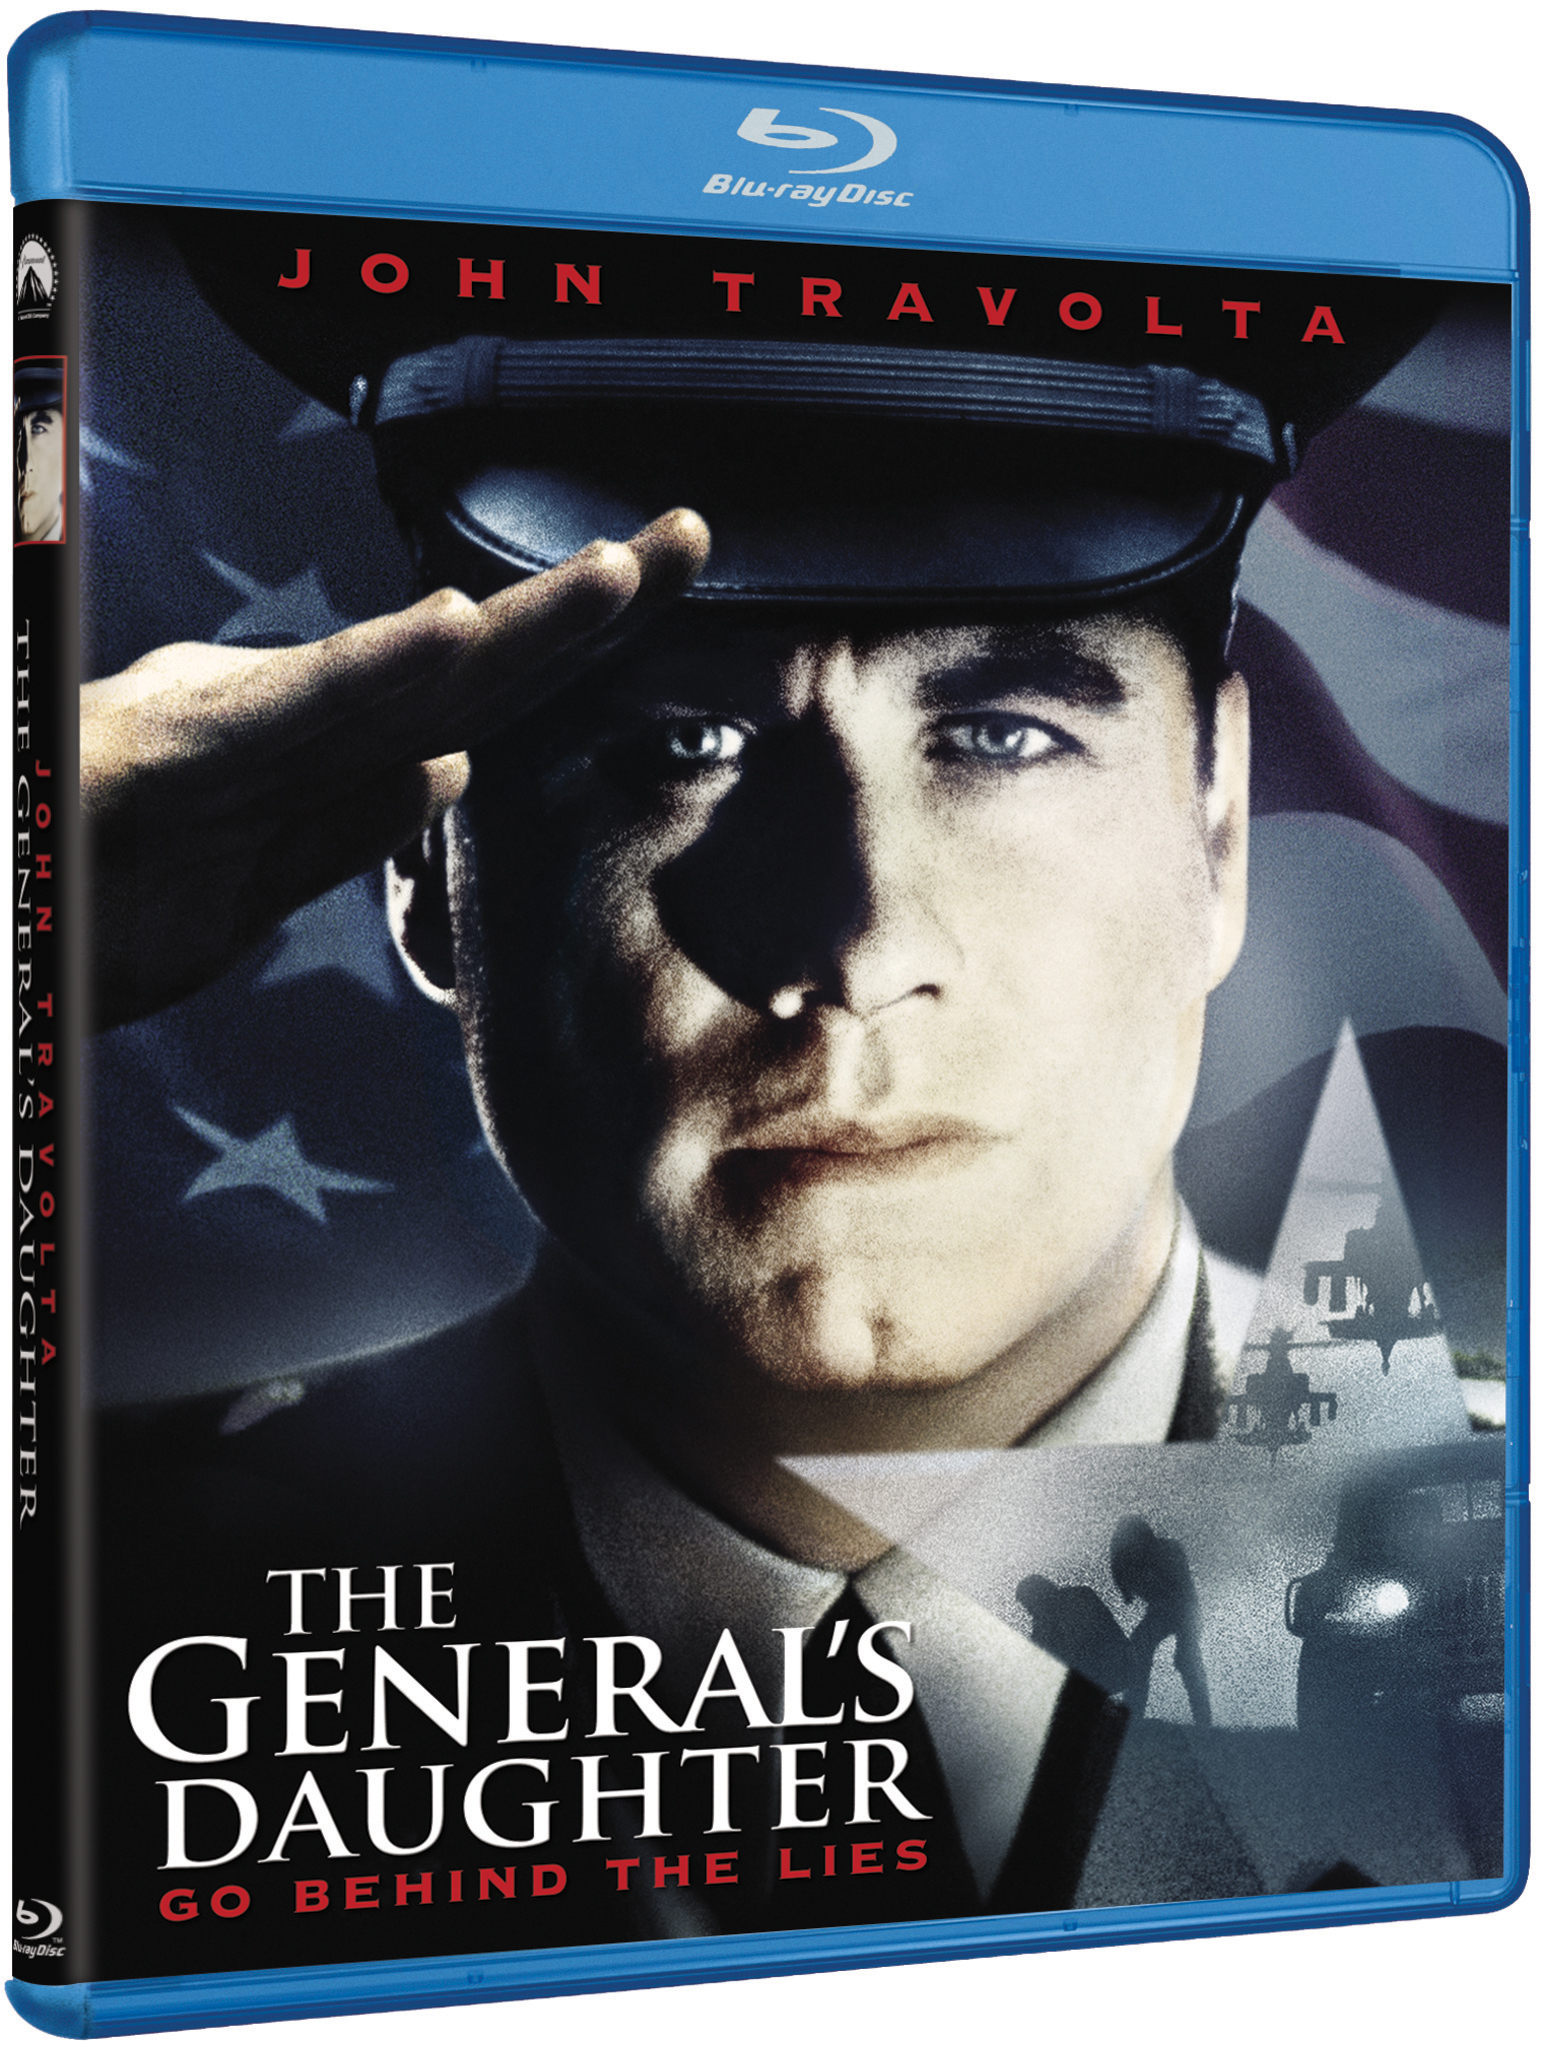 The General's Daughter [Blu-ray] [1999]